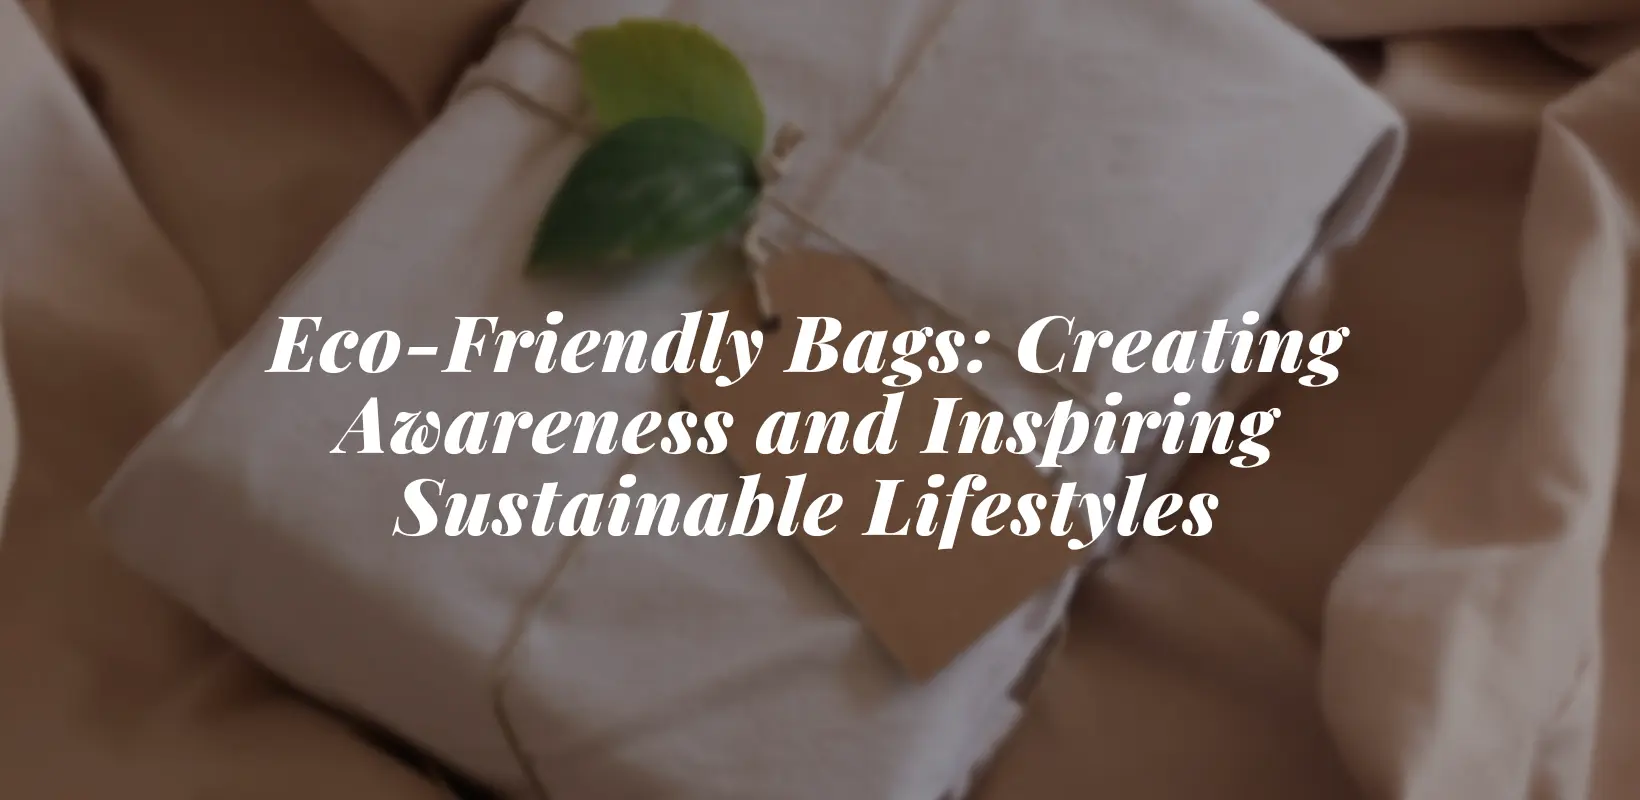 Eco-Friendly Bags: Creating Awareness and Inspiring Sustainable Lifestyles